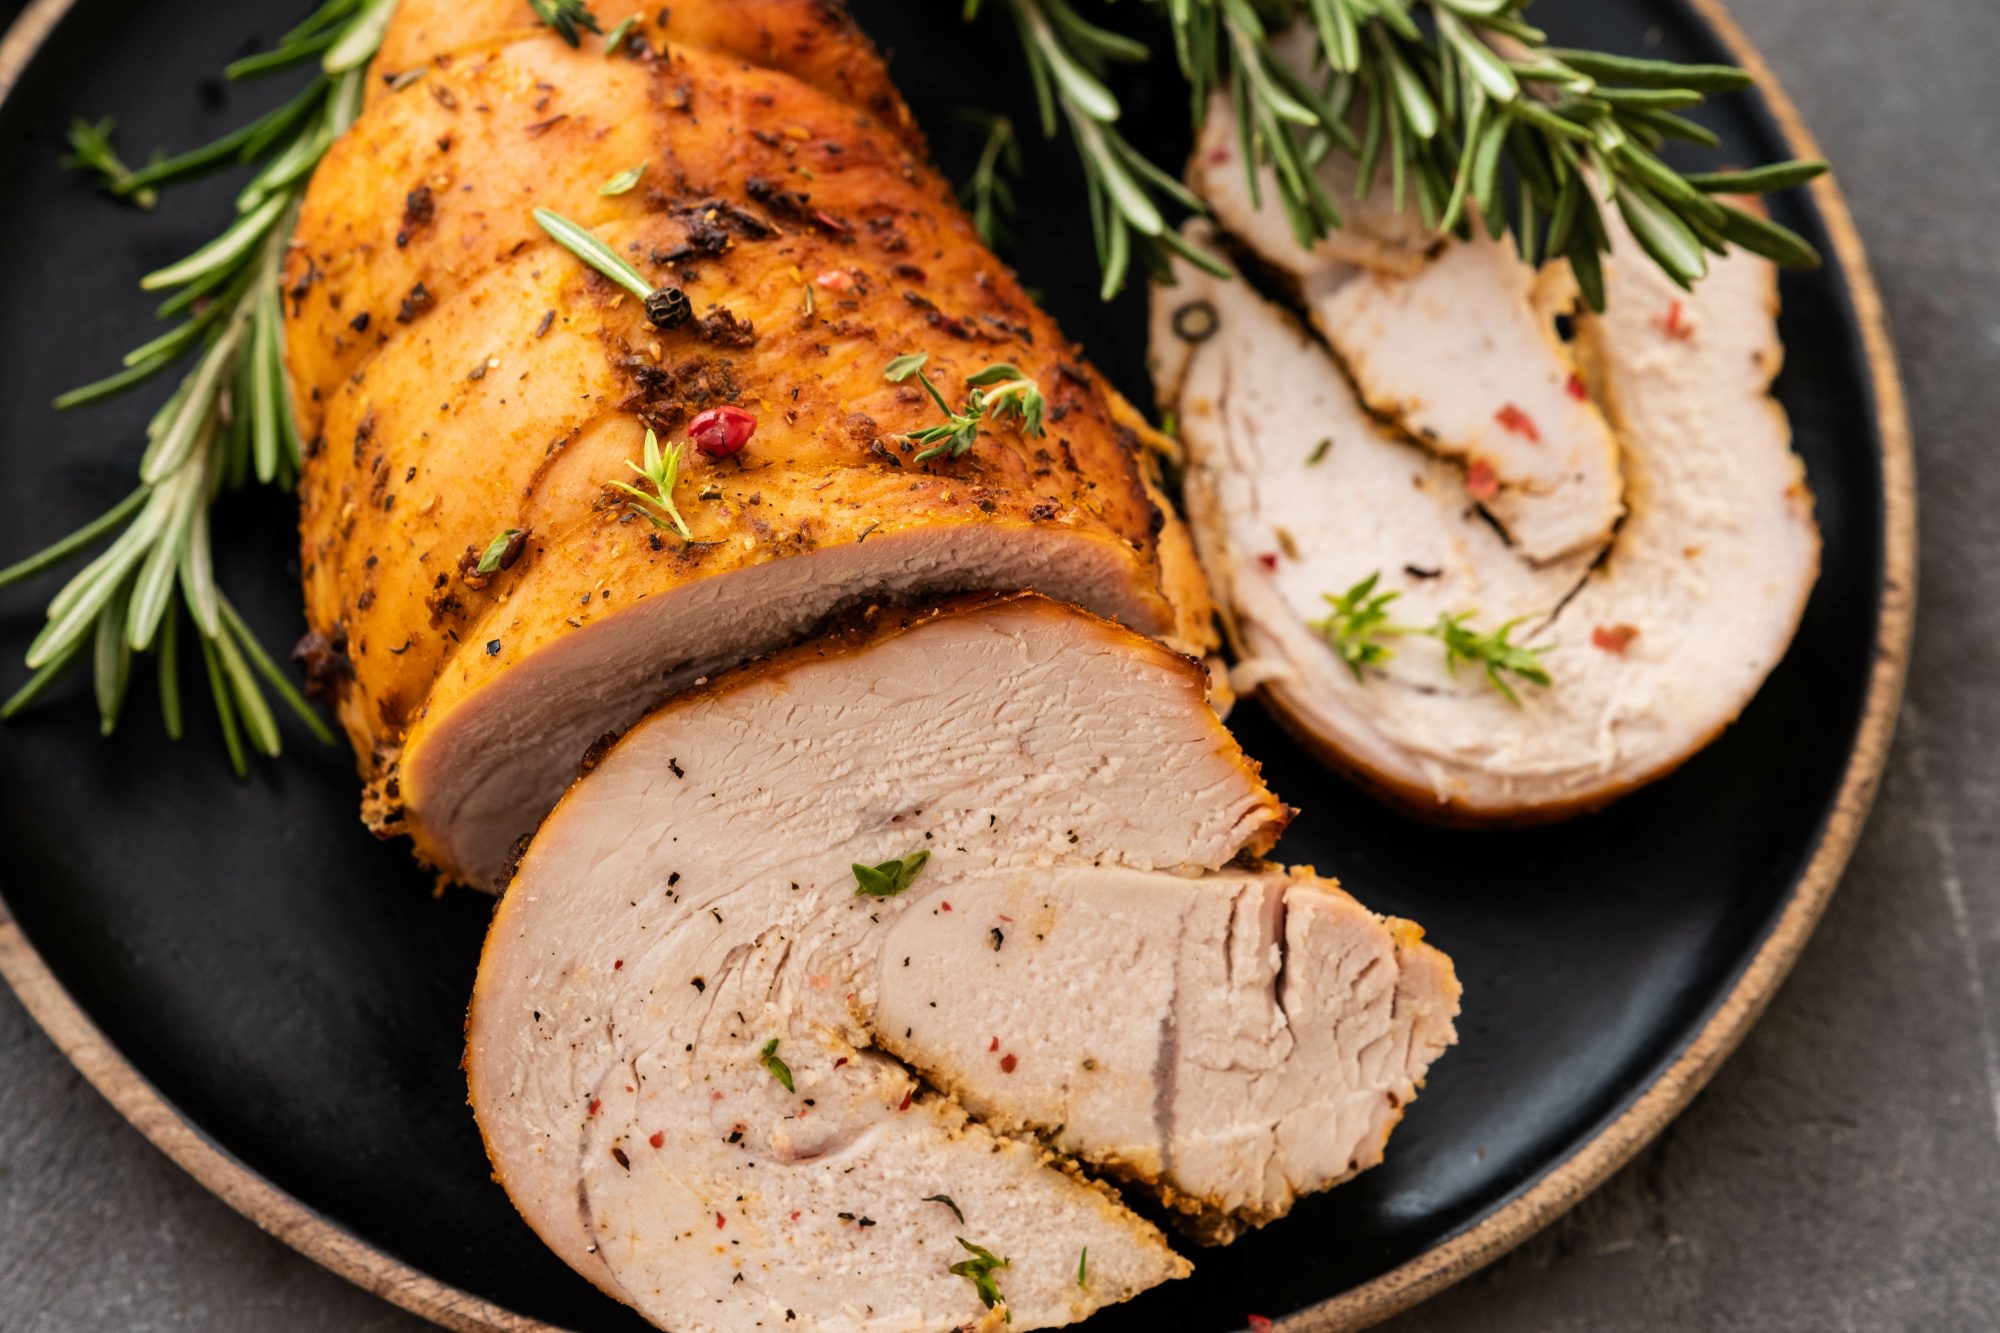 Stuffed turkey breast with baked vegetables and spices on a black background.